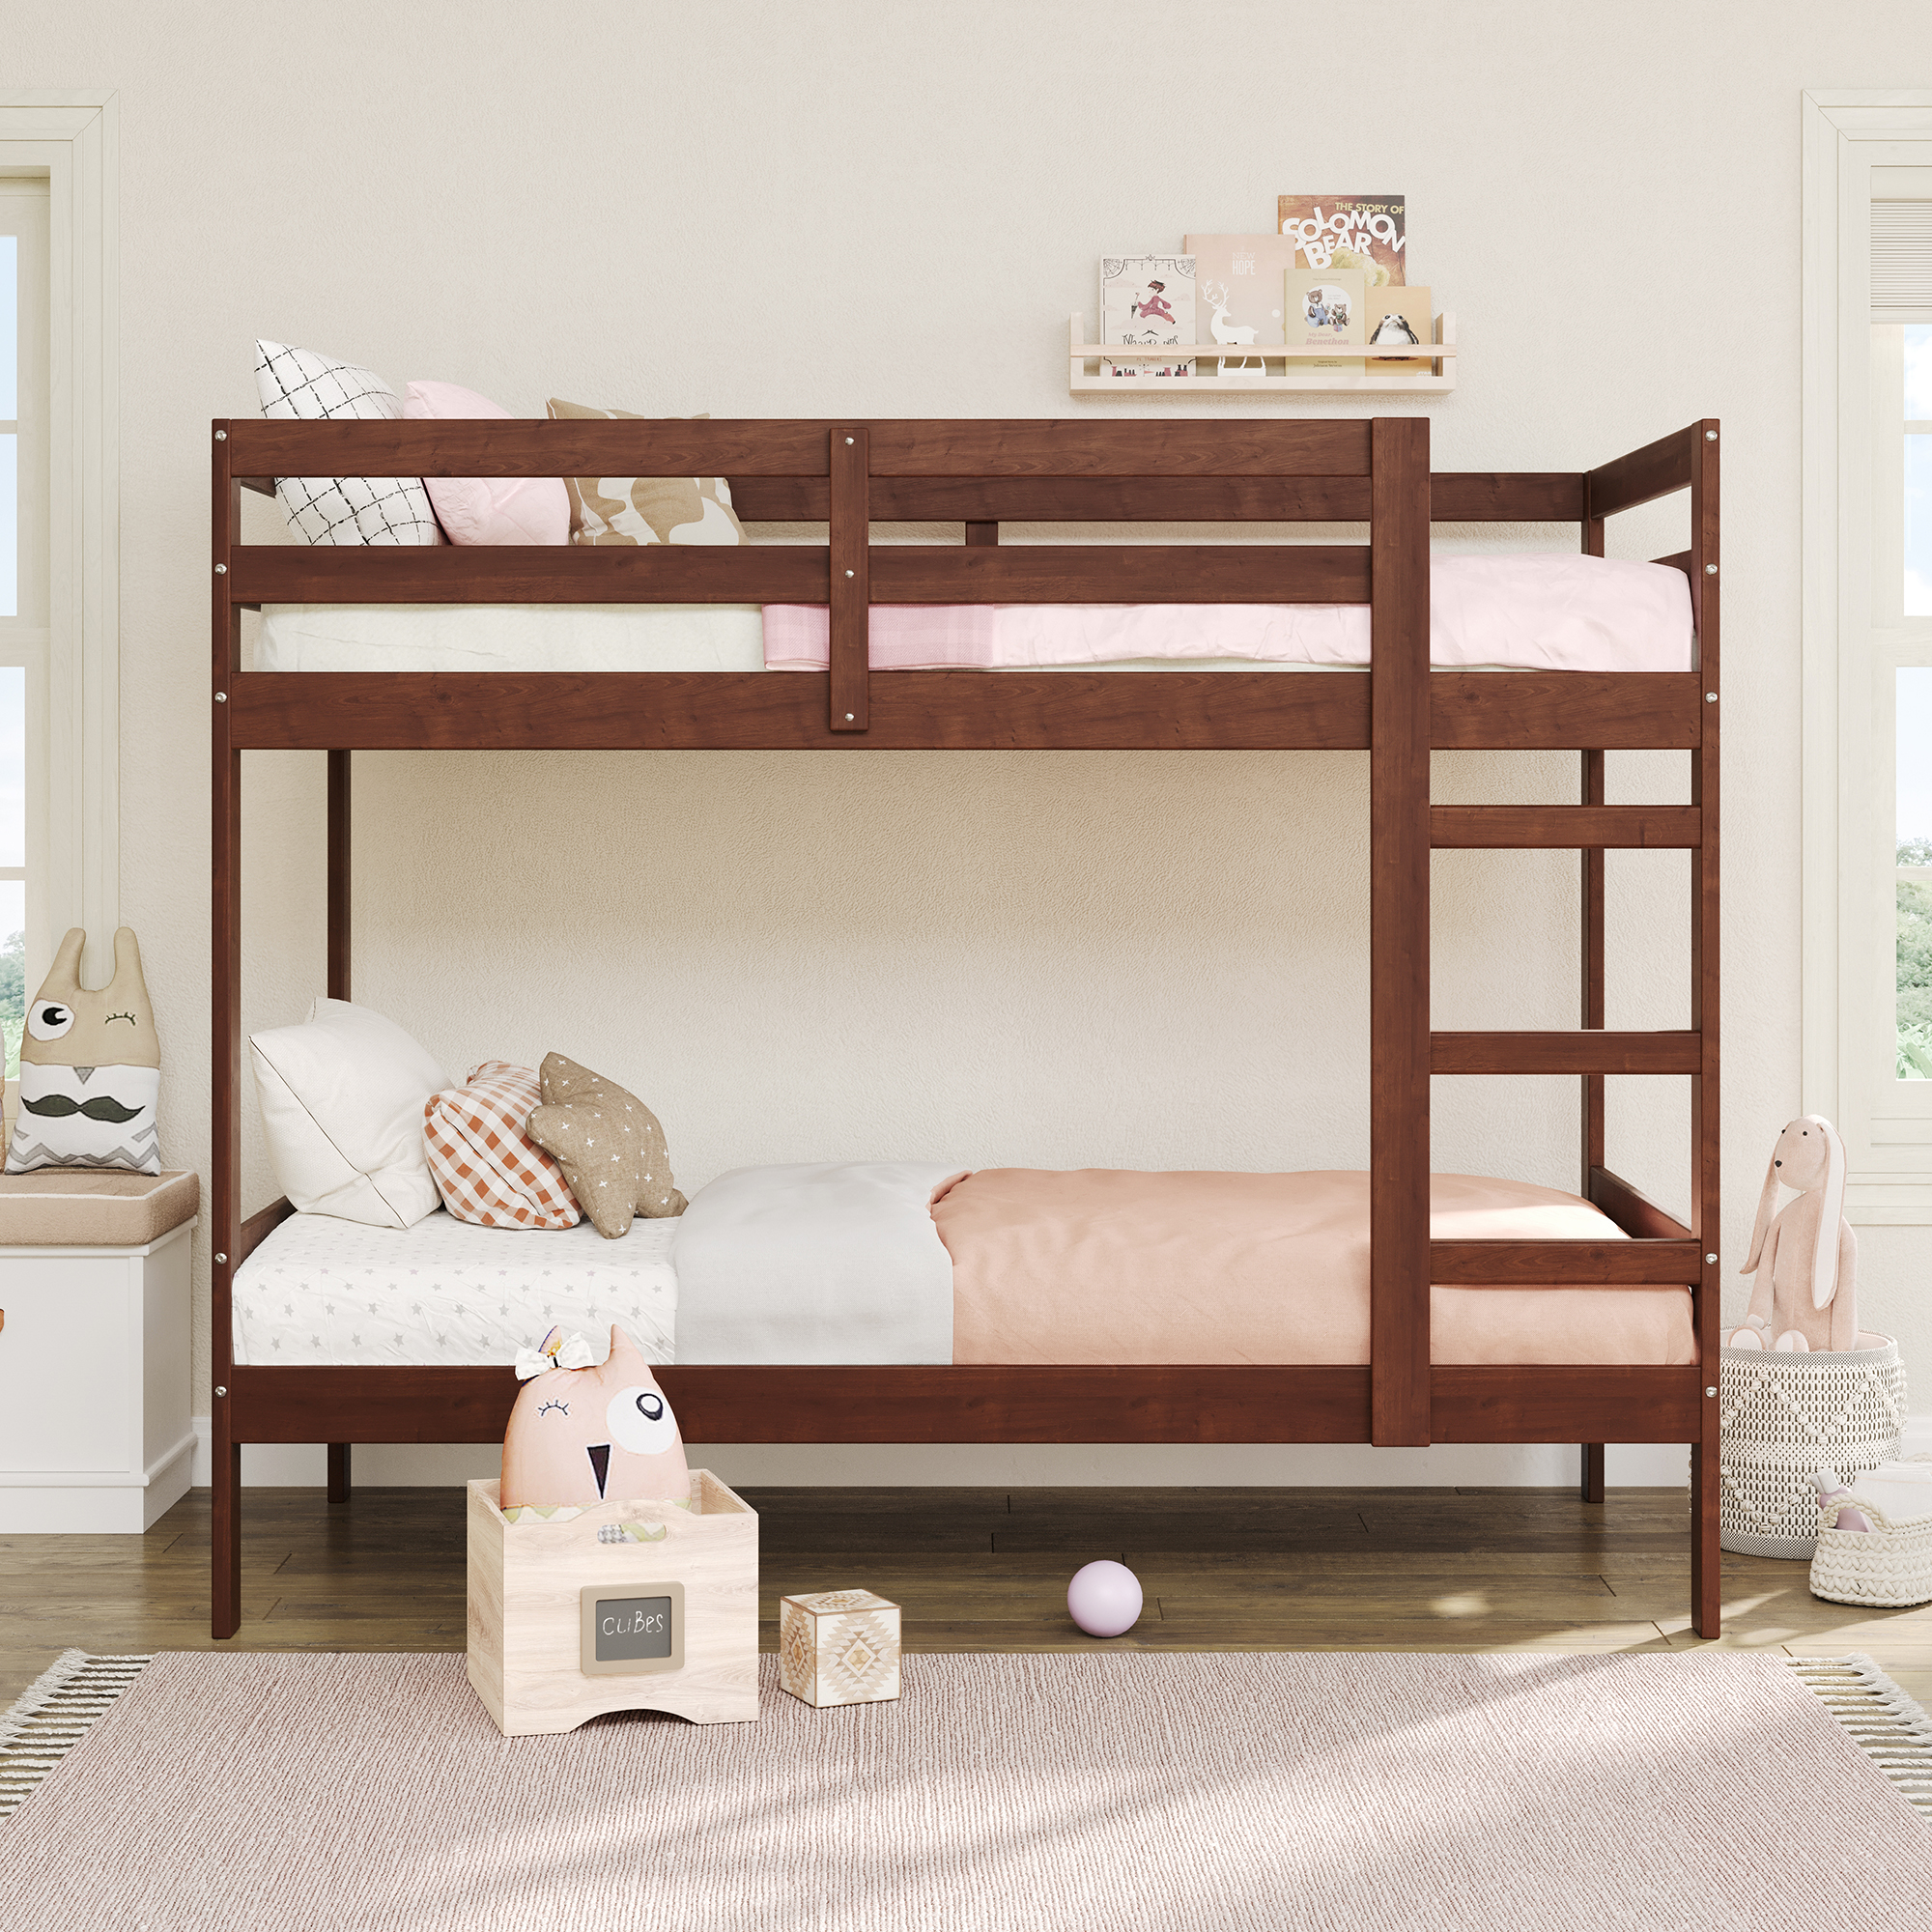 Walker Edison Modern Solid Wood Twin over Twin Bunkbed, Espresso - image 1 of 15